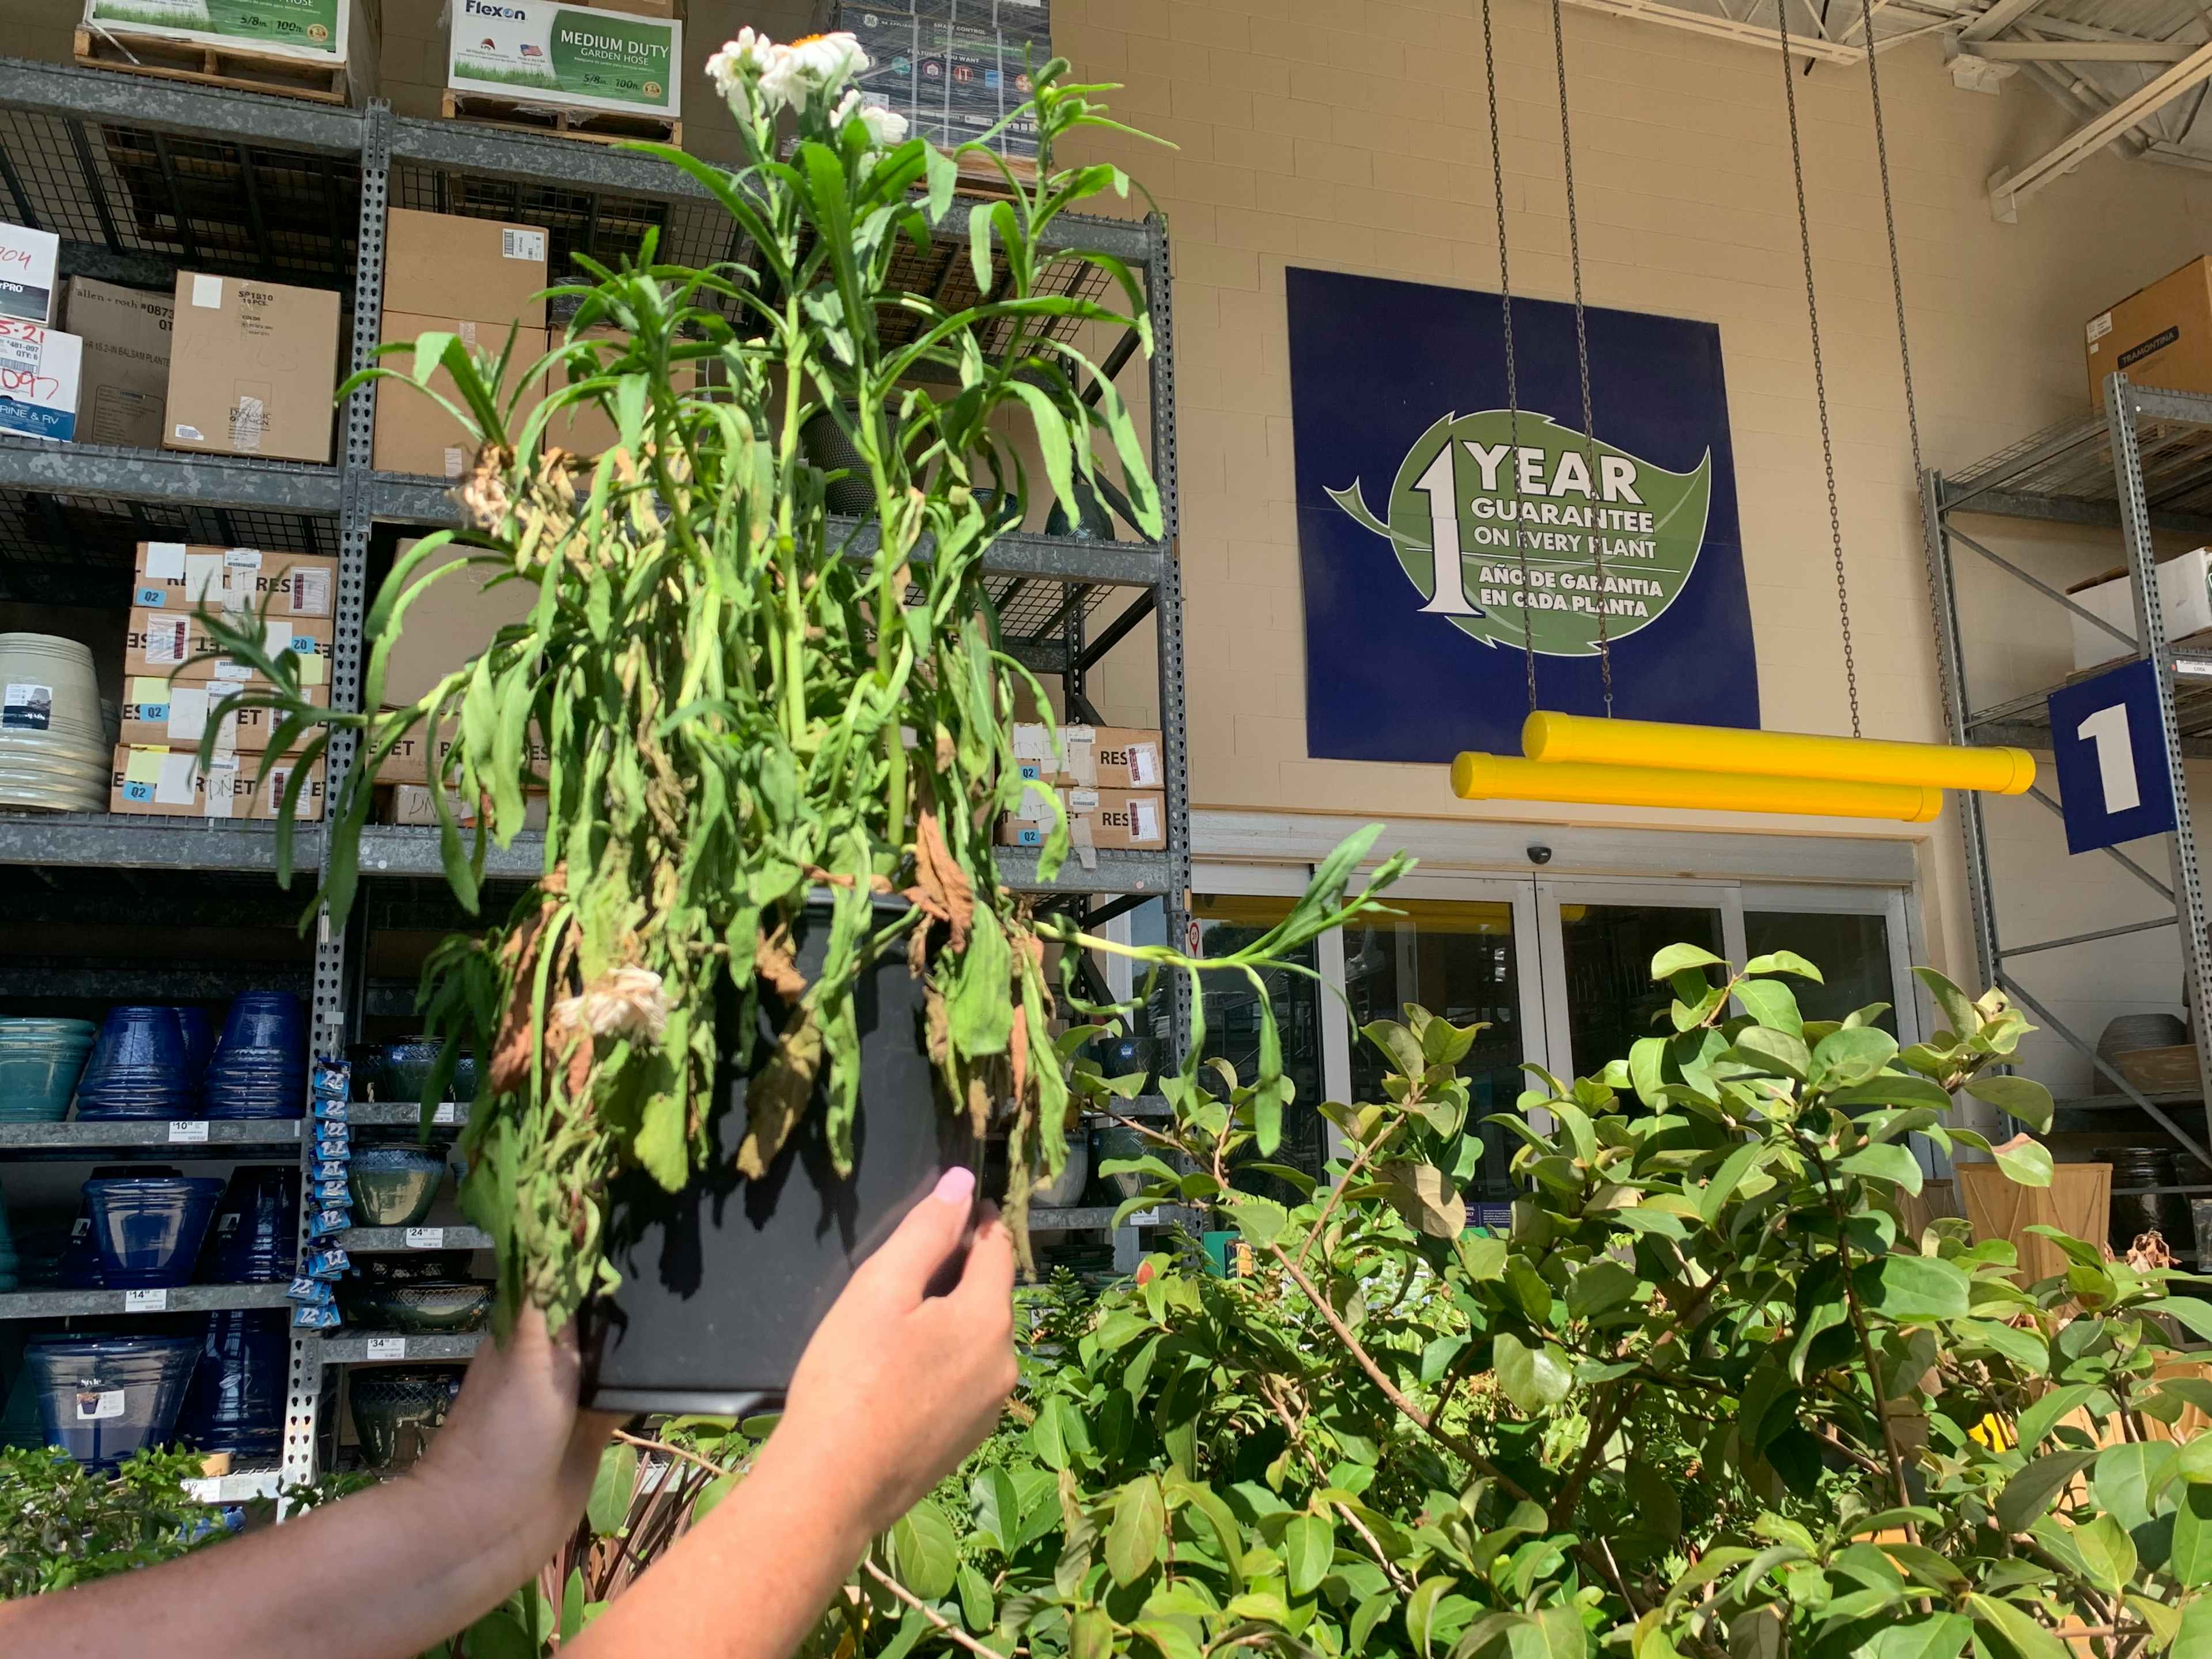 dead plant being held in front of 1 year guarantee sign in the Lowe's garden center